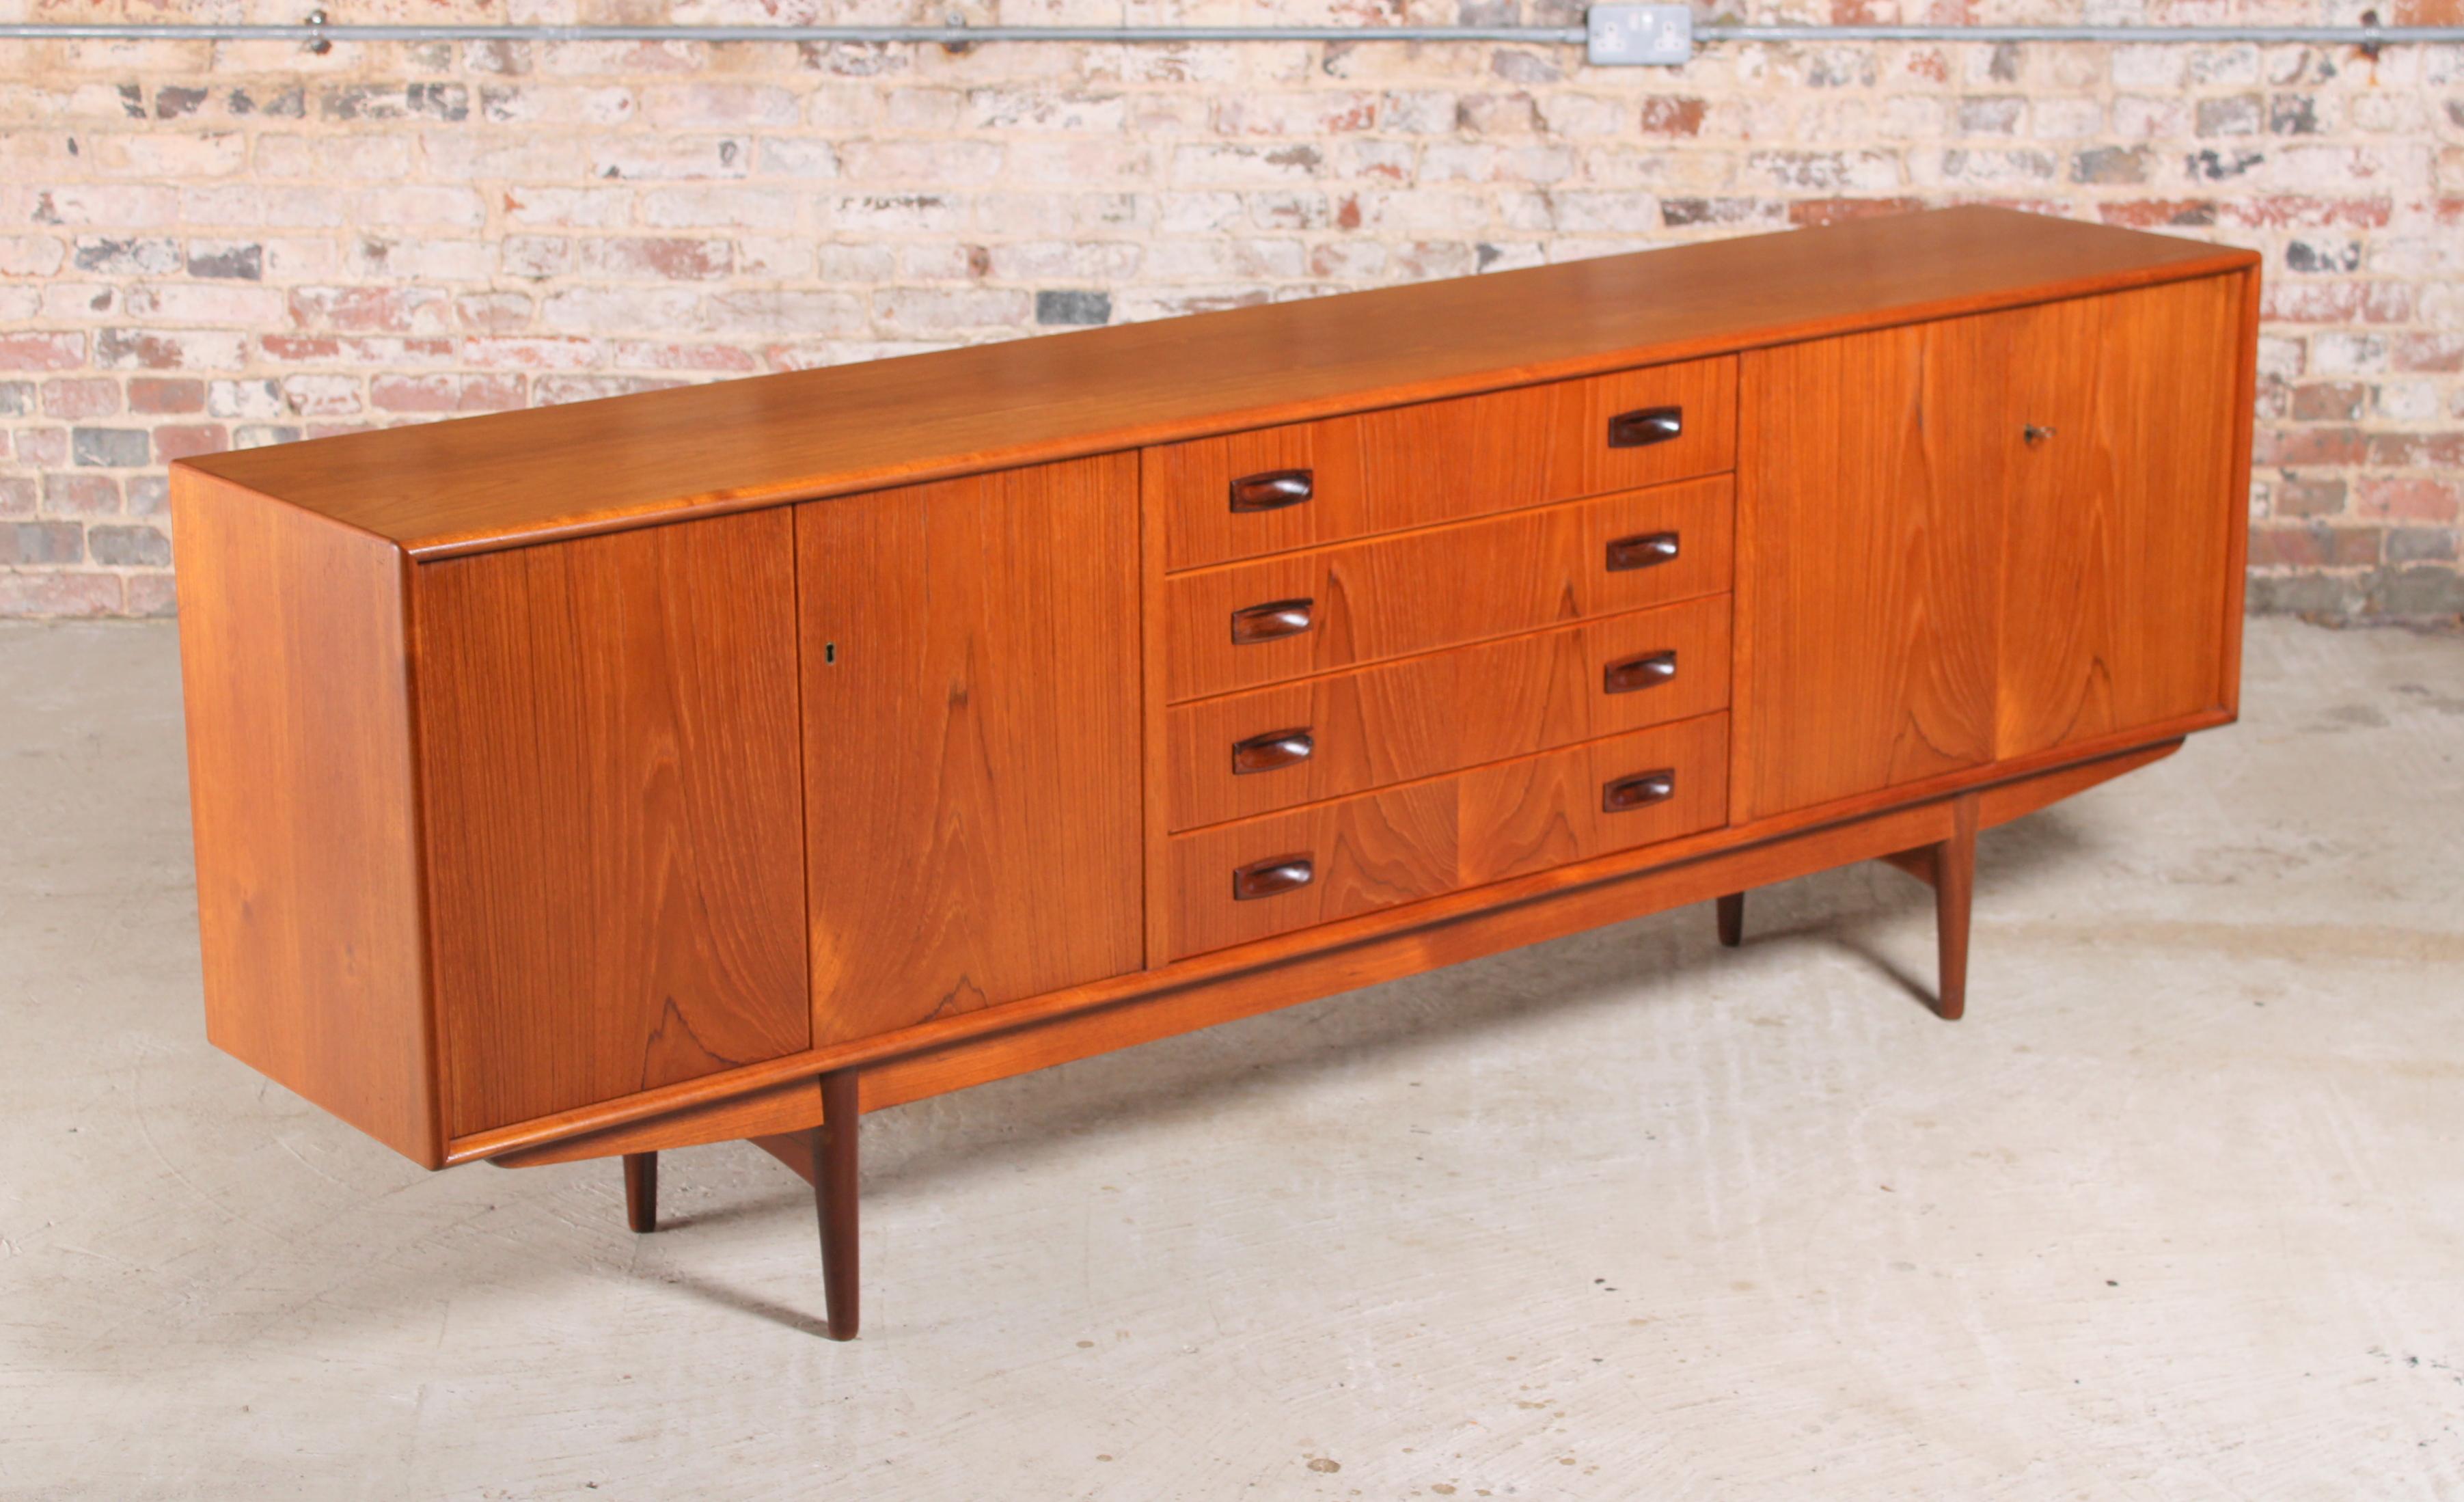 Danish Mid Century teak sideboard with carved rosewood handles, circa 1960s. 2 lockable cabinets and 4 drawers. The back is also beautifully veneered, so could be placed in the middle of a room. 

Dimensions: 219 W x 42 D x 78 H cm.